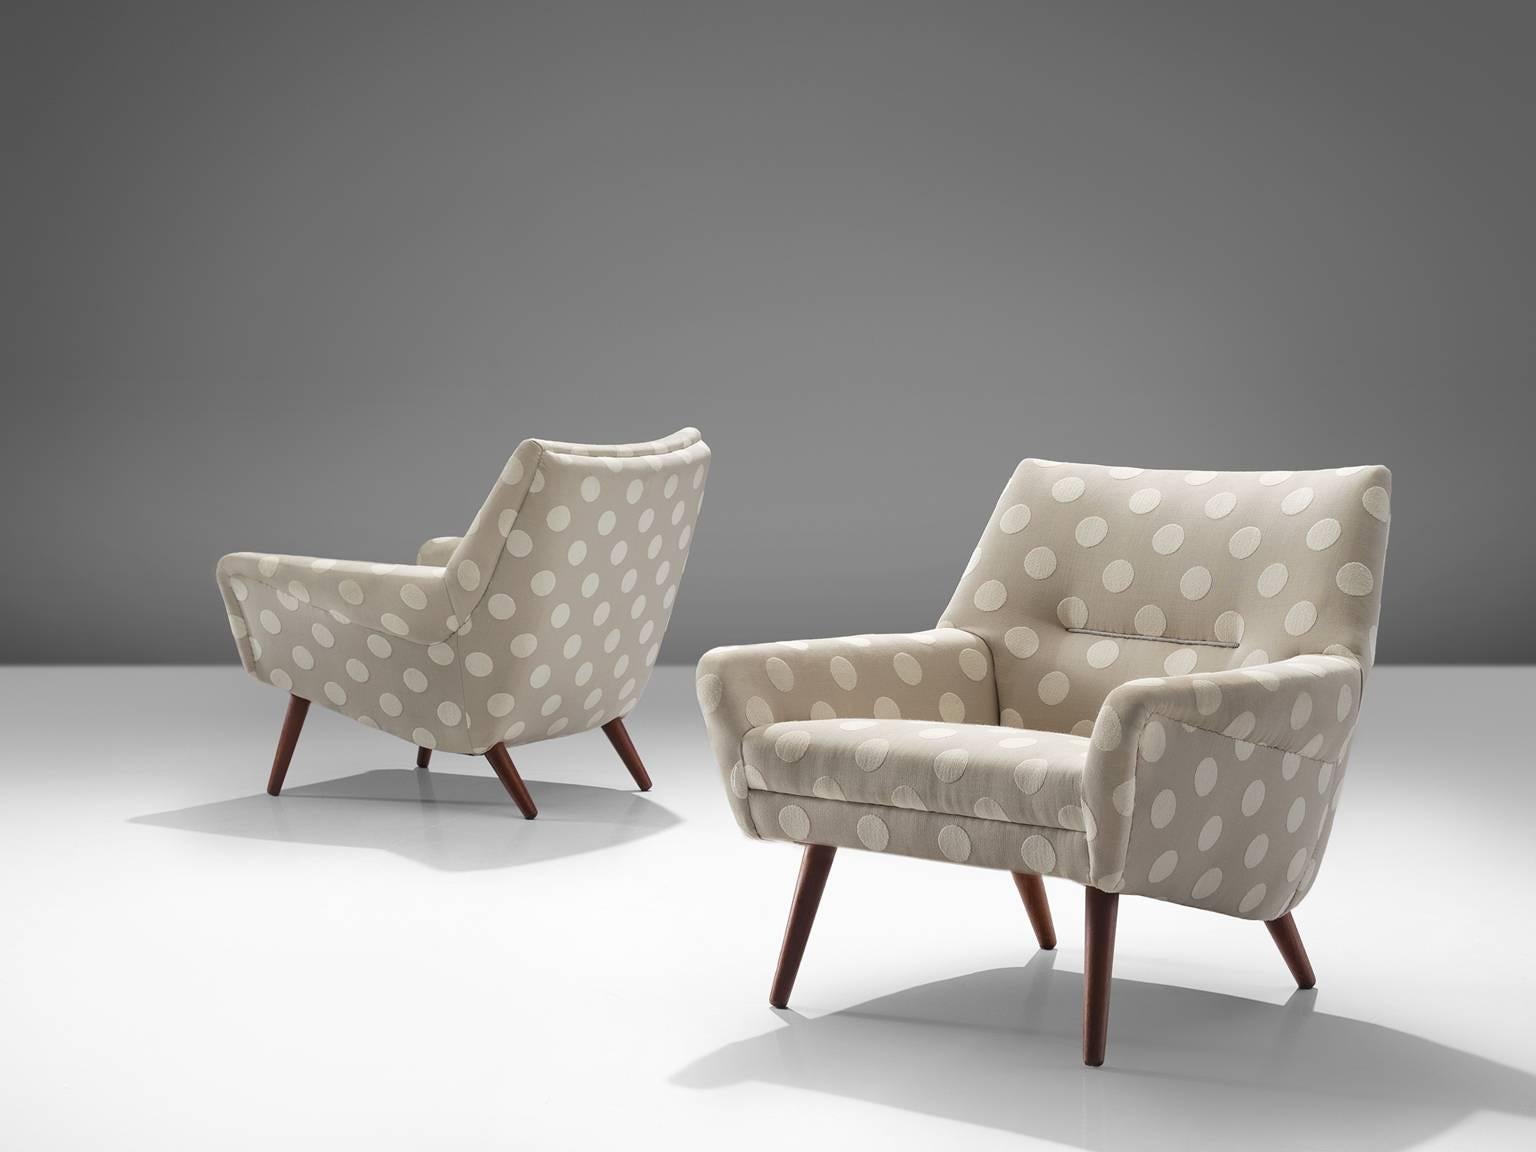 Easy chairs, grey and white polka dotted fabric, teak, Denmark, 1960s.

These armchairs show refined Danish craftsmanship and aesthetics. The backs feature a slightly tilted back and comfortable cushions in both the seat and back, as can be expected